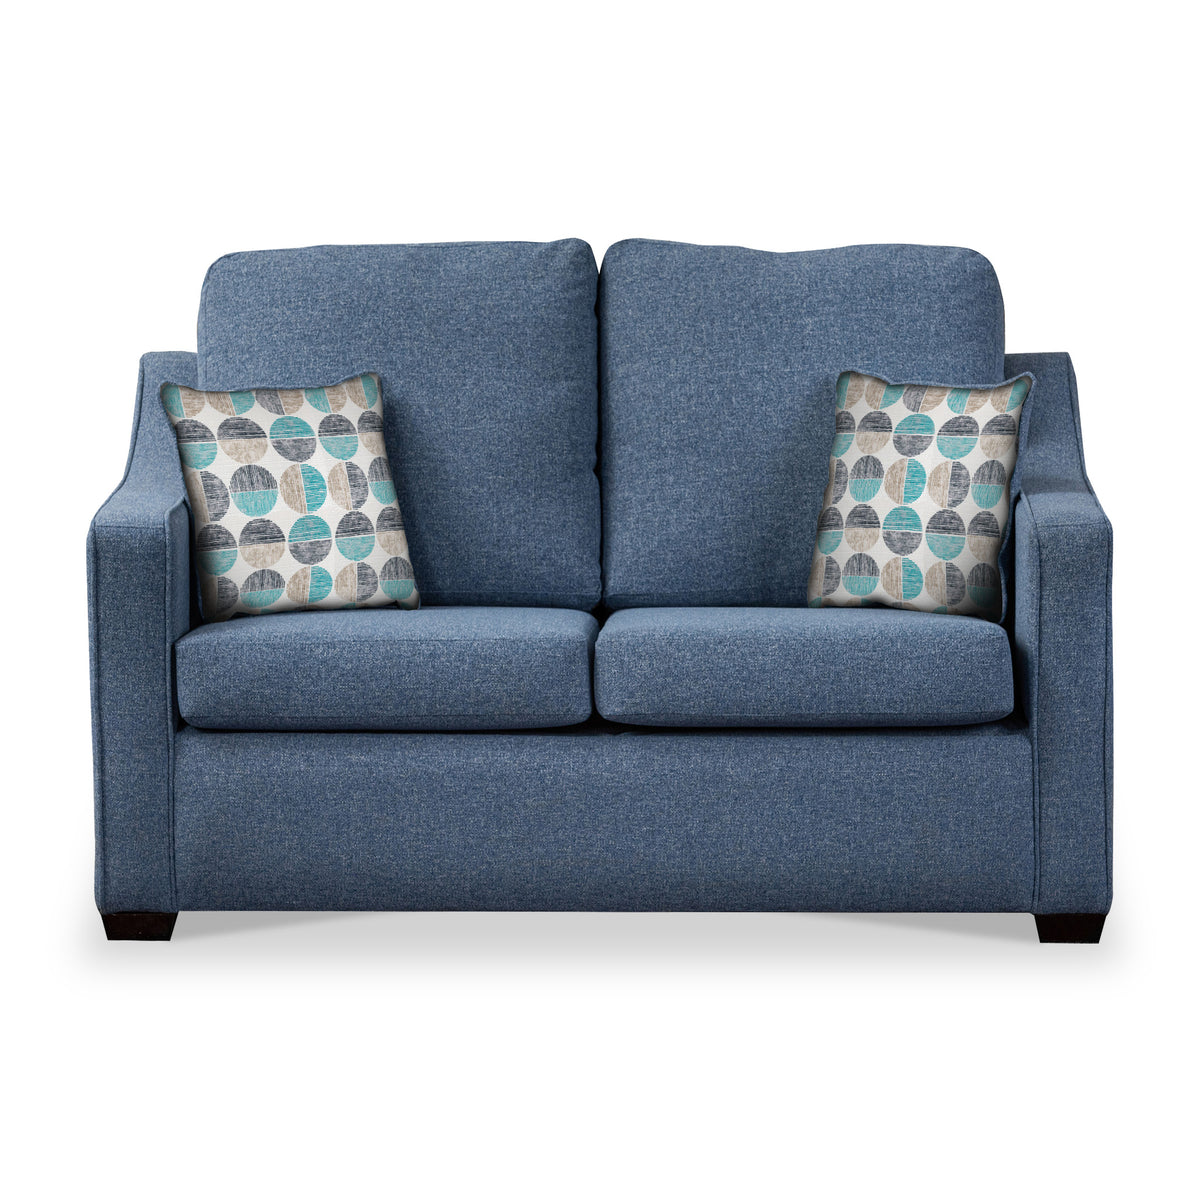 Charlcote Denim Faux Linen 2 Seater Sofabed with Duck Egg Scatter Cushions from Roseland Furniture